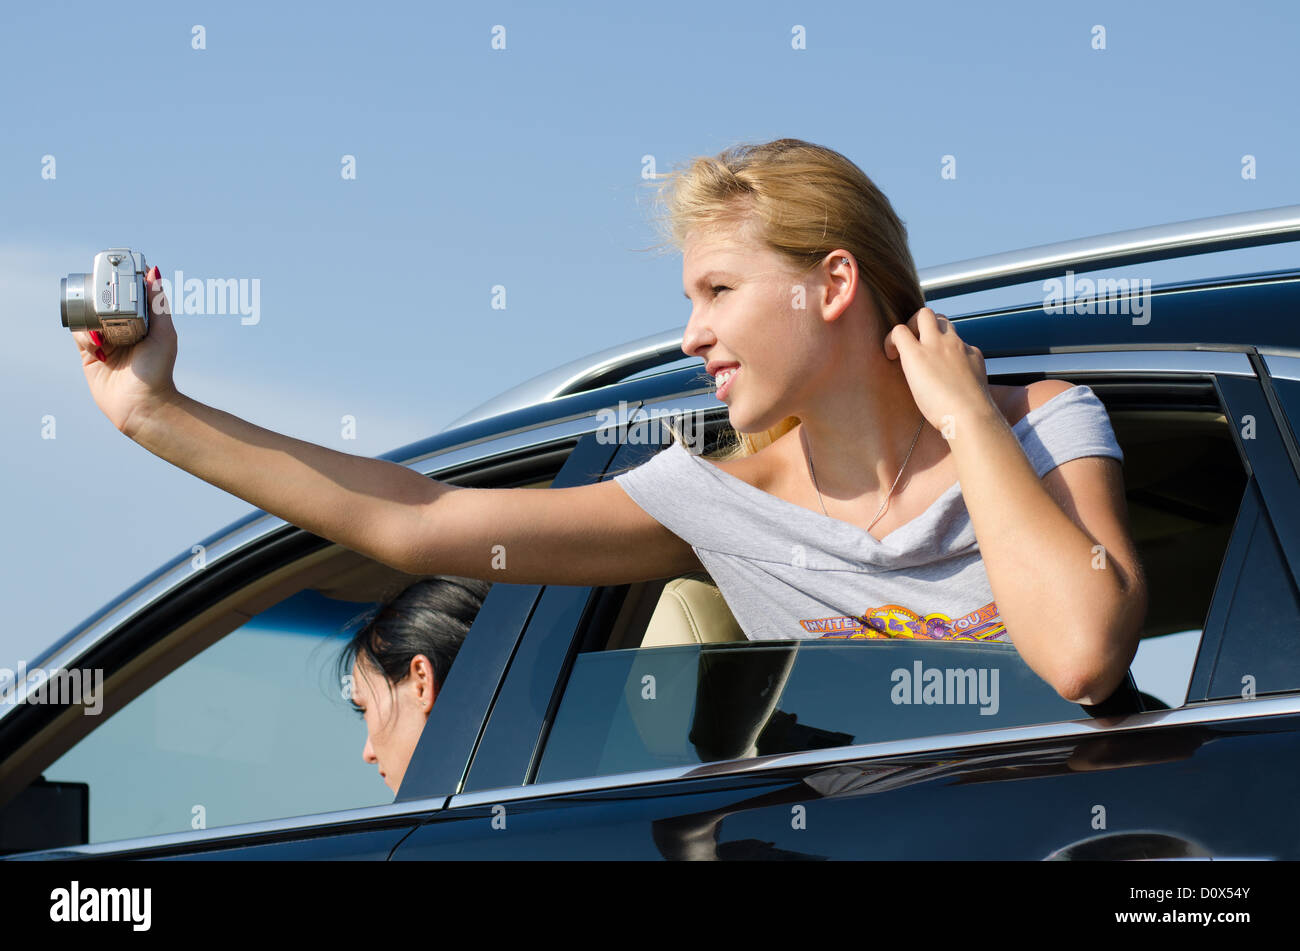 Young blonde woman leaning out of the passenger window taking photos from a car Stock Photo